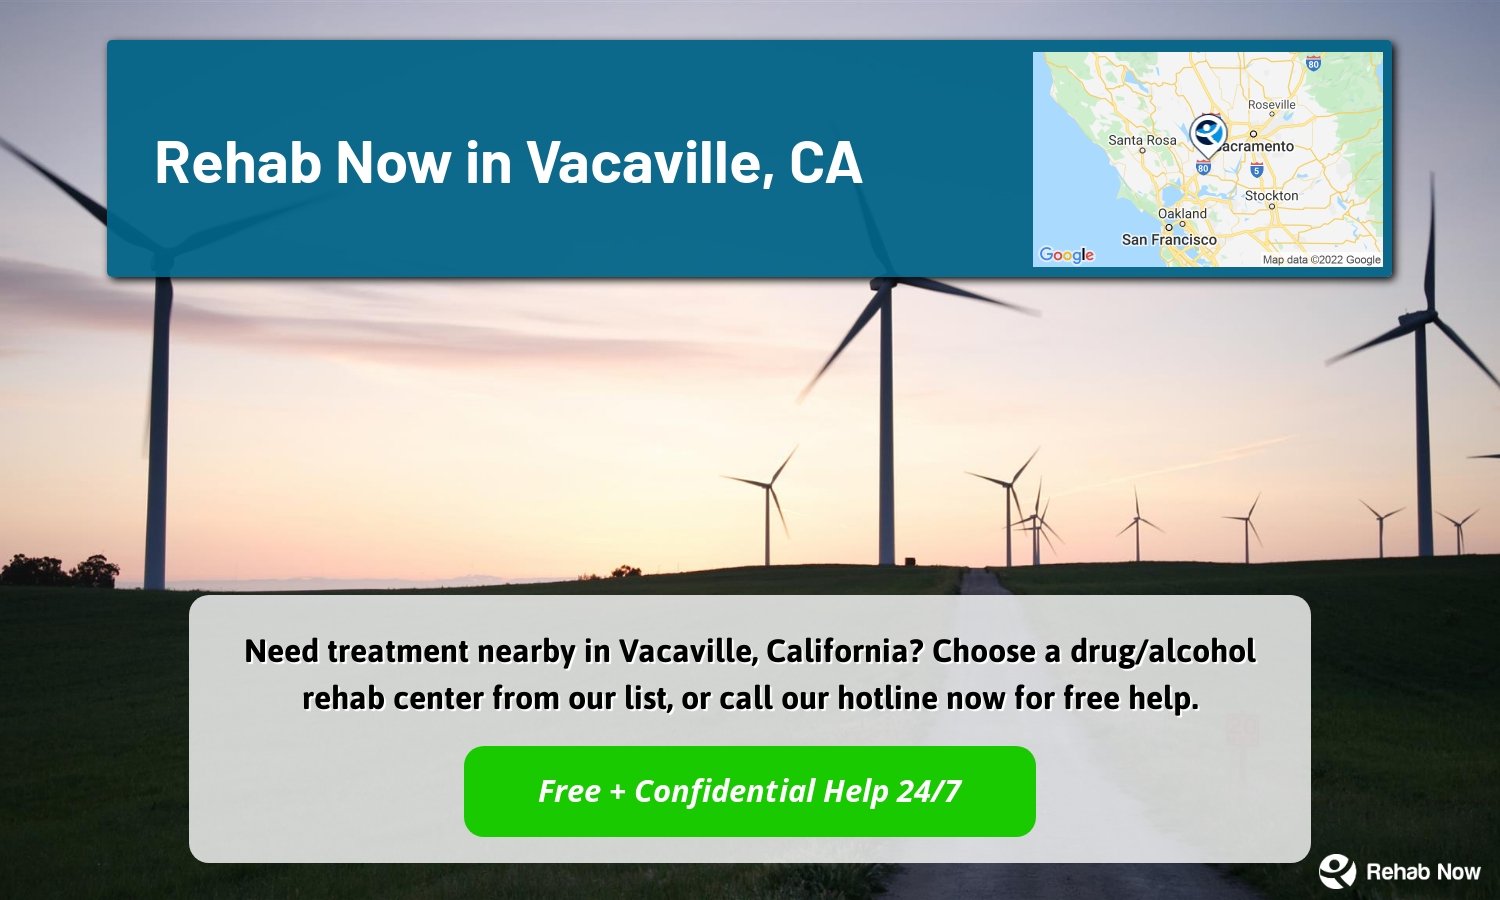 Need treatment nearby in Vacaville, California? Choose a drug/alcohol rehab center from our list, or call our hotline now for free help.